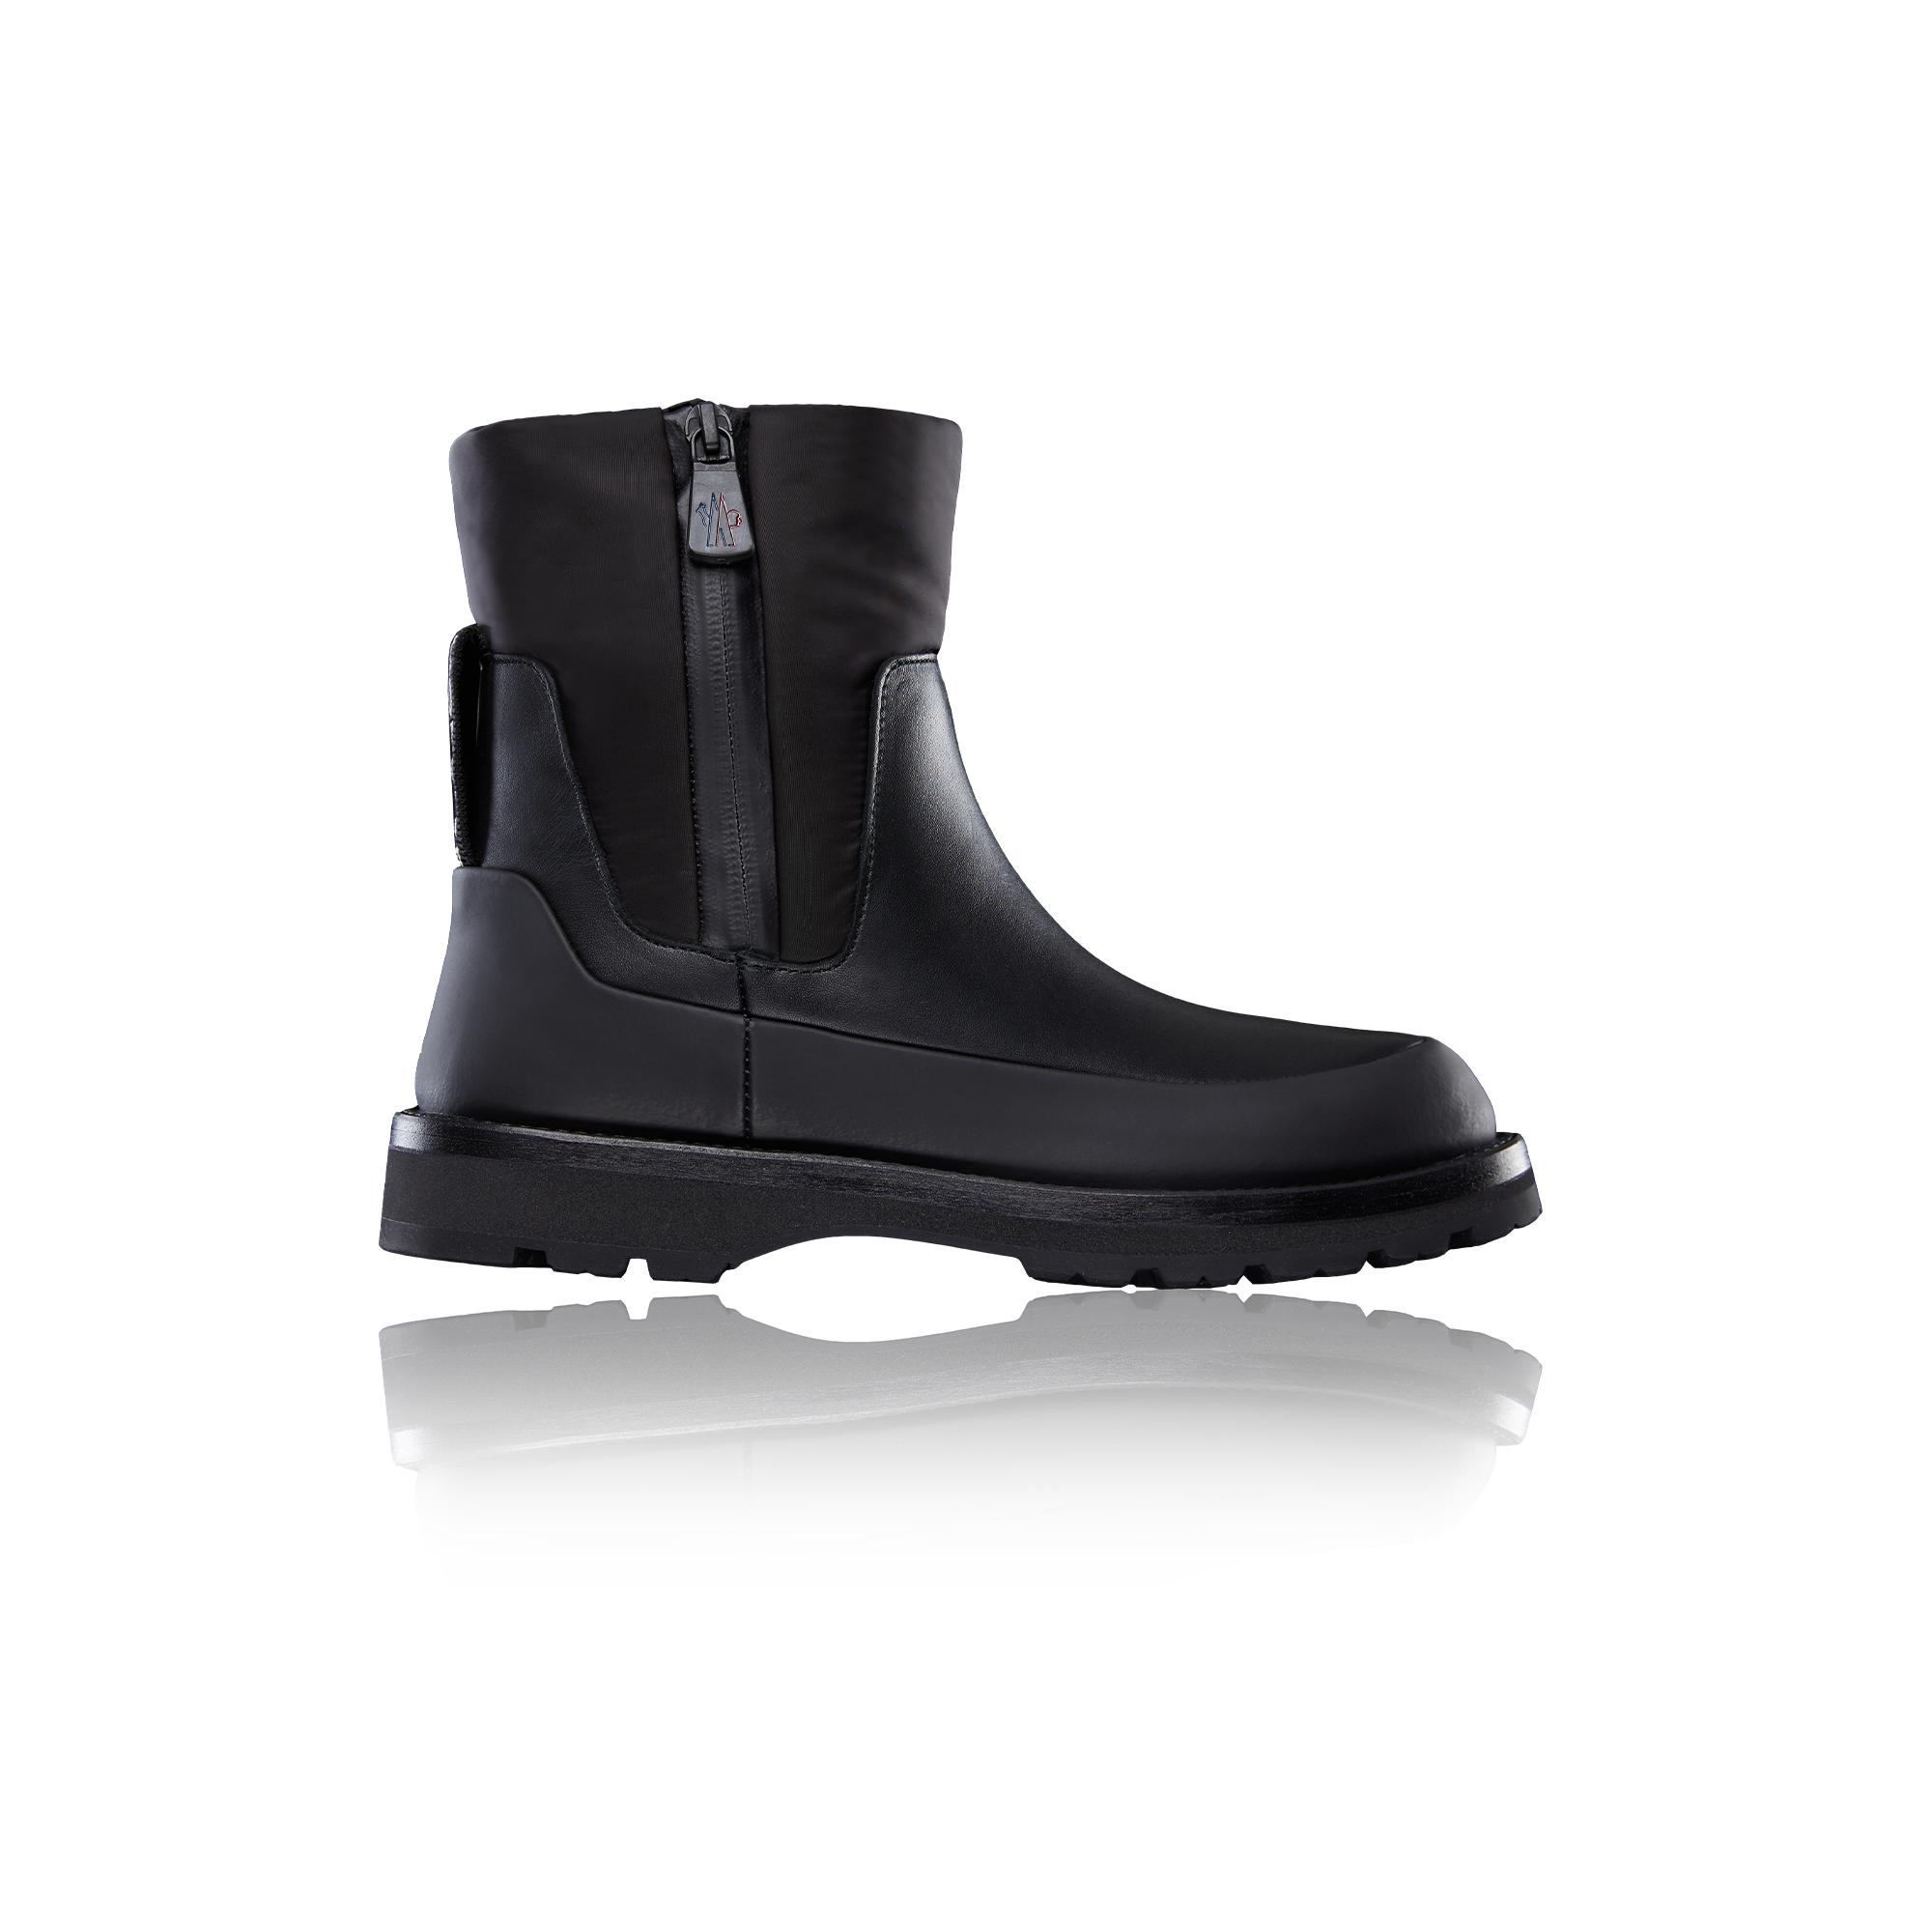 Moncler Leather Don't Care Rain Boots in Black | Lyst